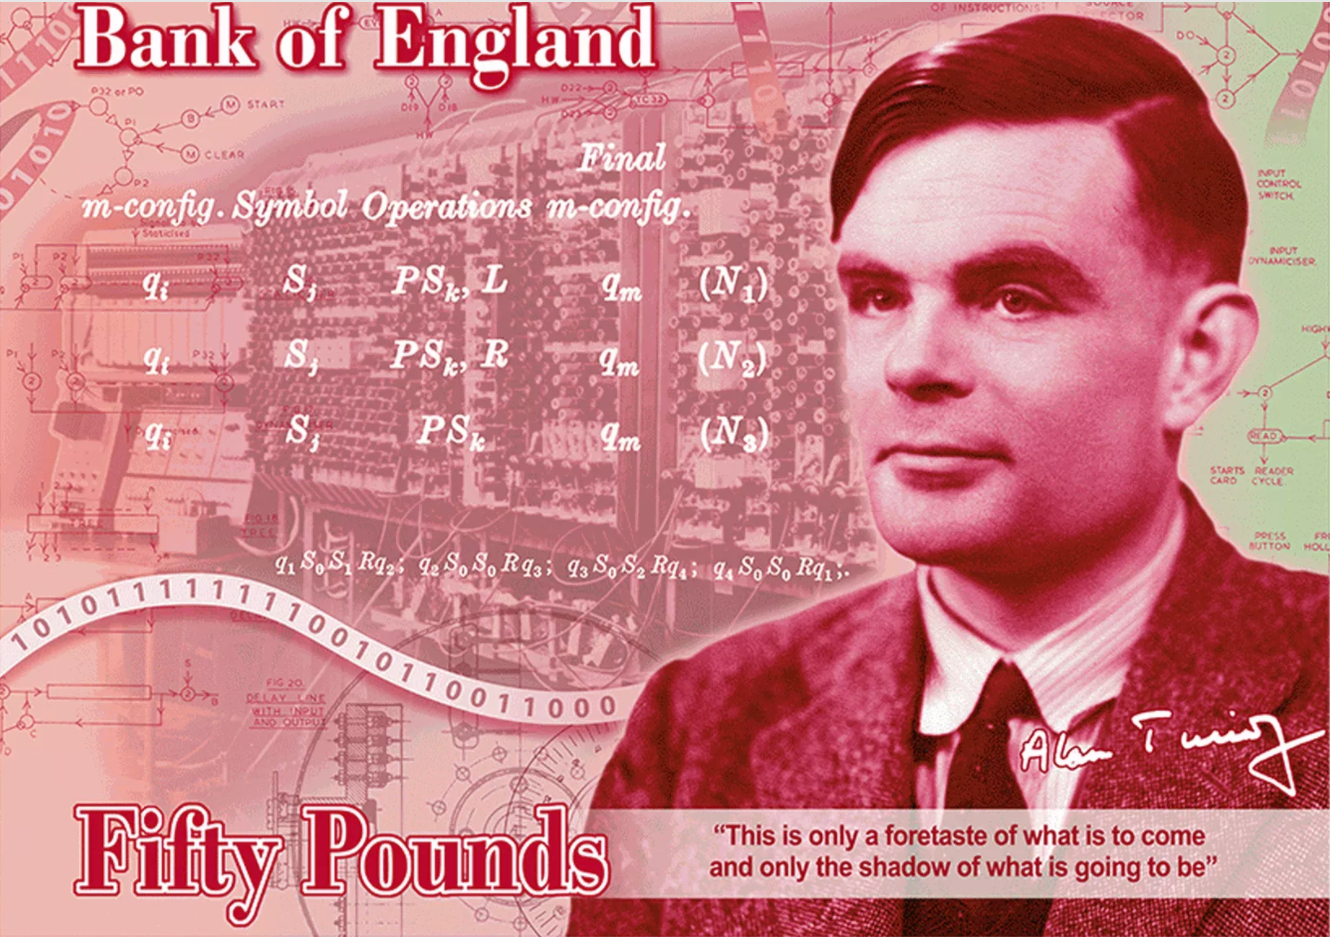 7 Things You Probably Don't Know About Bletchley Code Breaker Alan Turing